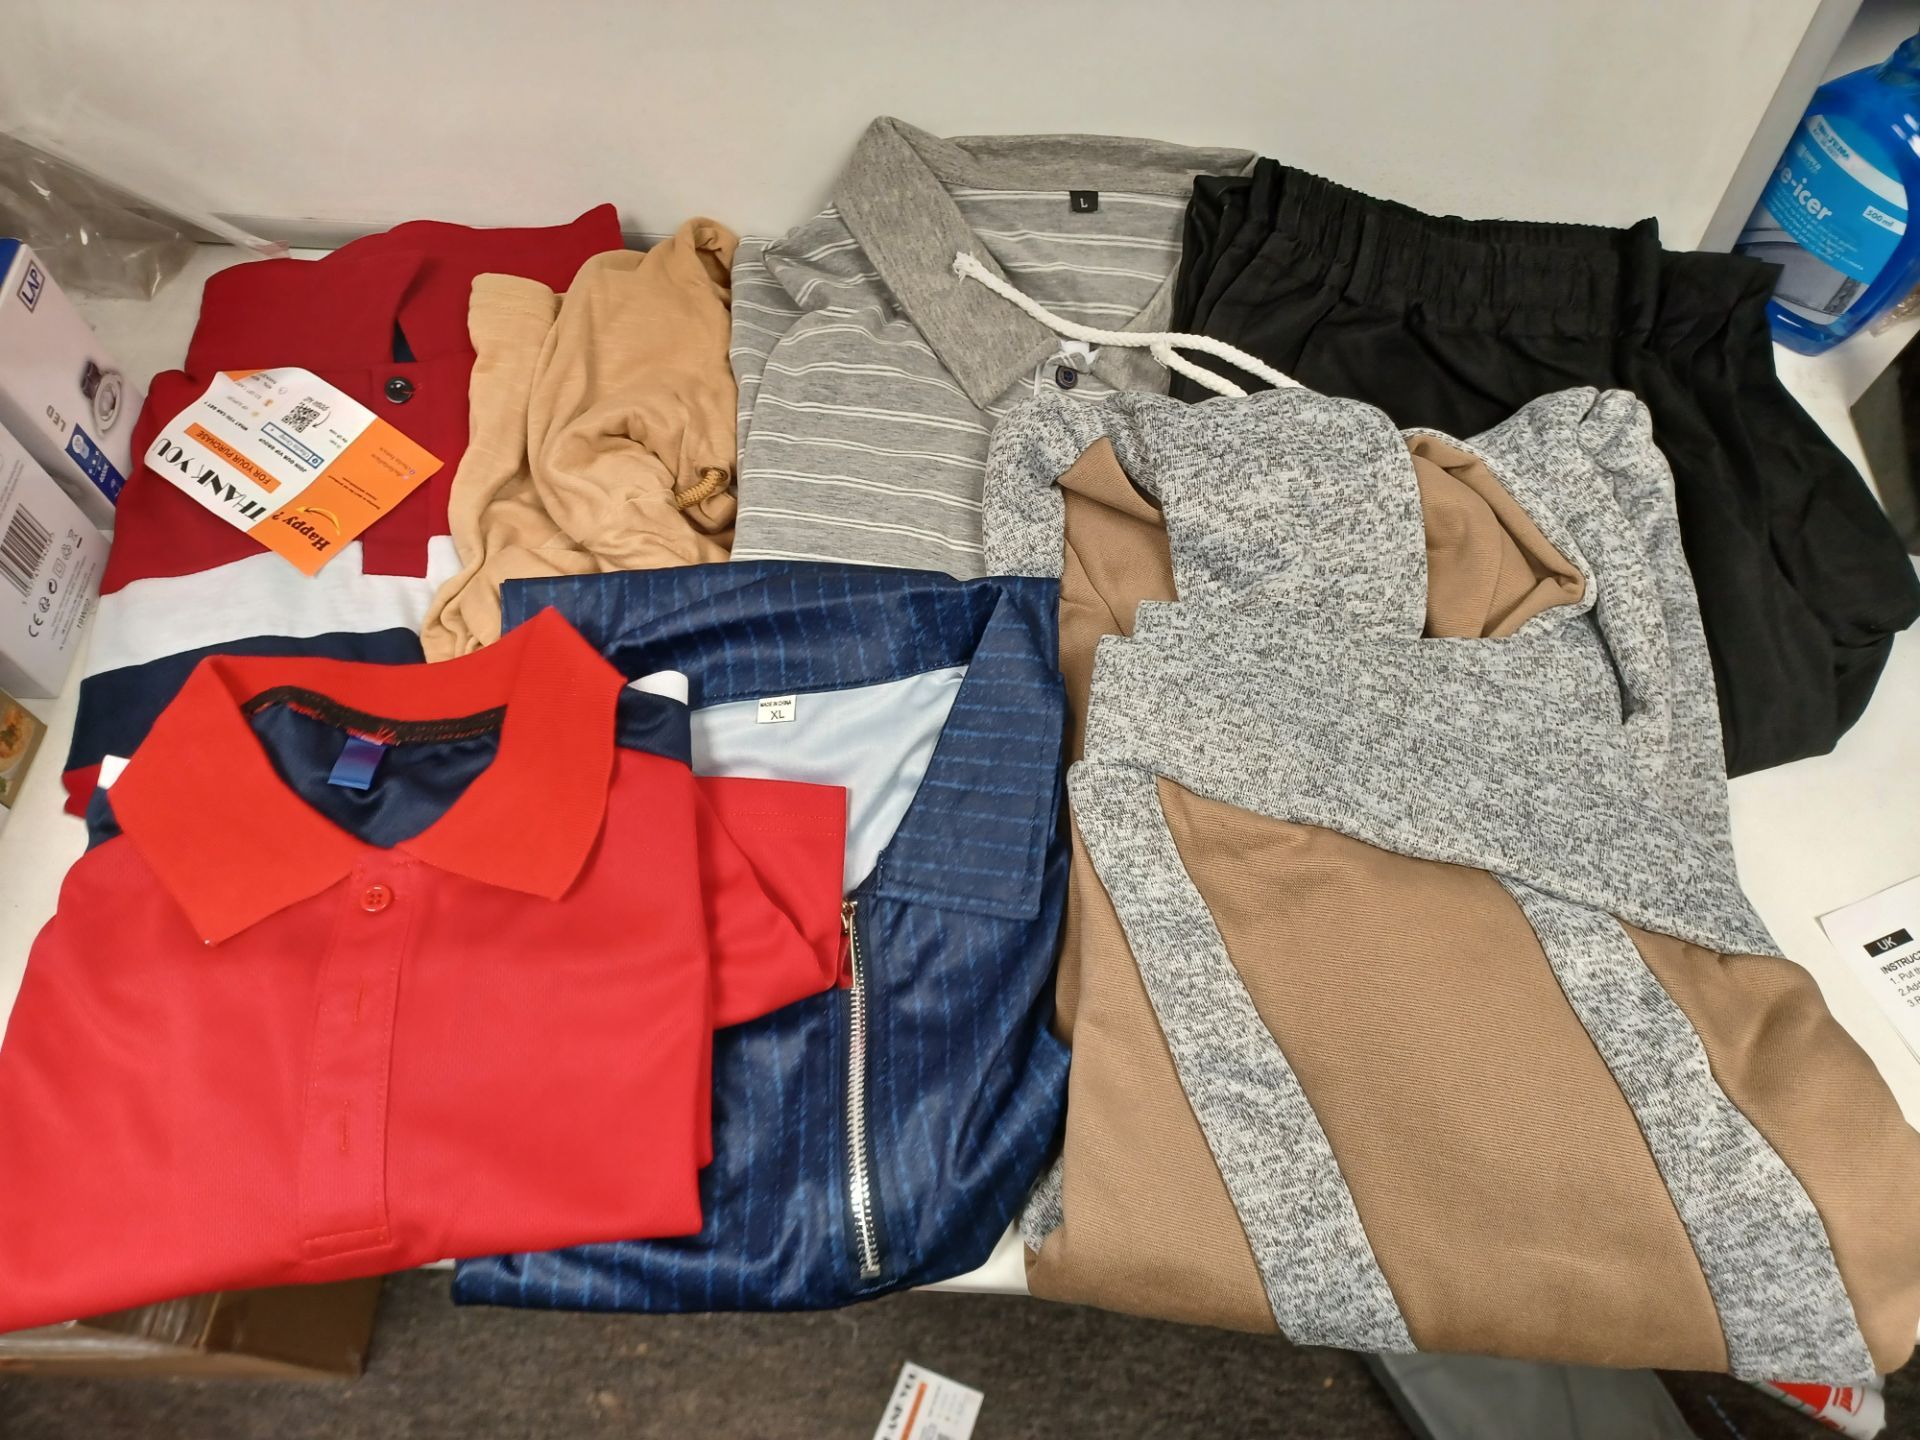 25 X BRAND NEW ASSORTED MENSWEAR LOT INCLUDING T SHIRTS, JUMPERS, HOODIES ETC